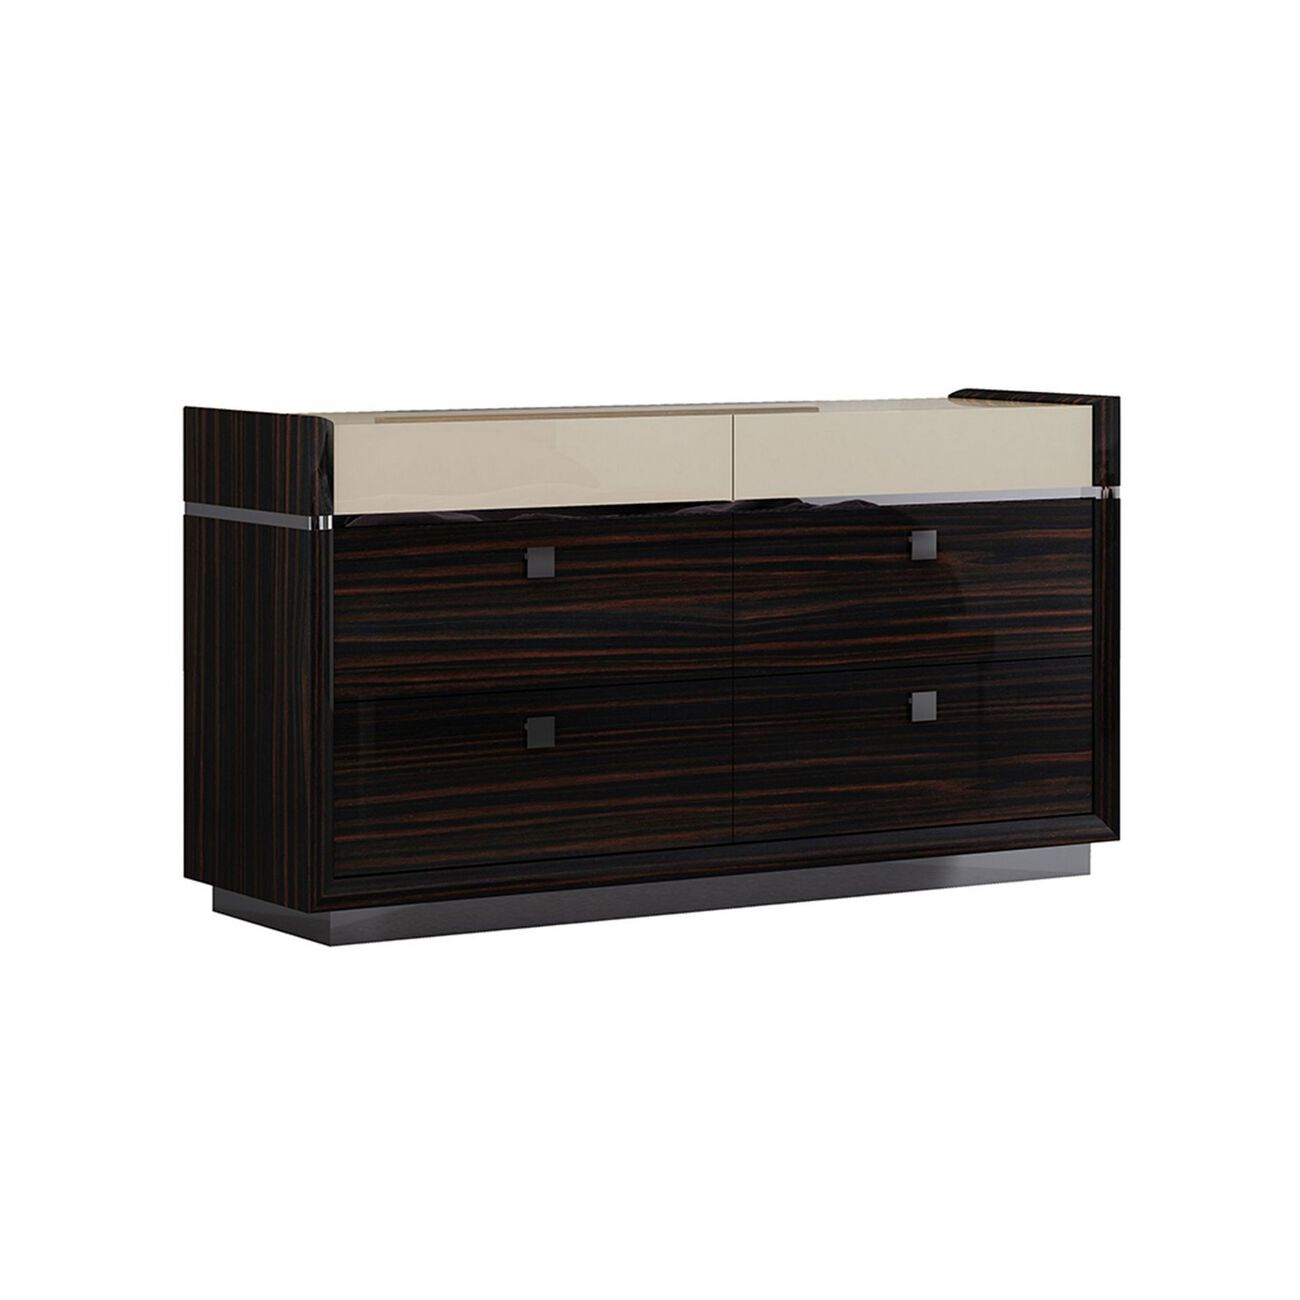 Contemporary 6 Drawer Wooden Dresser with Square Pulls, Brown